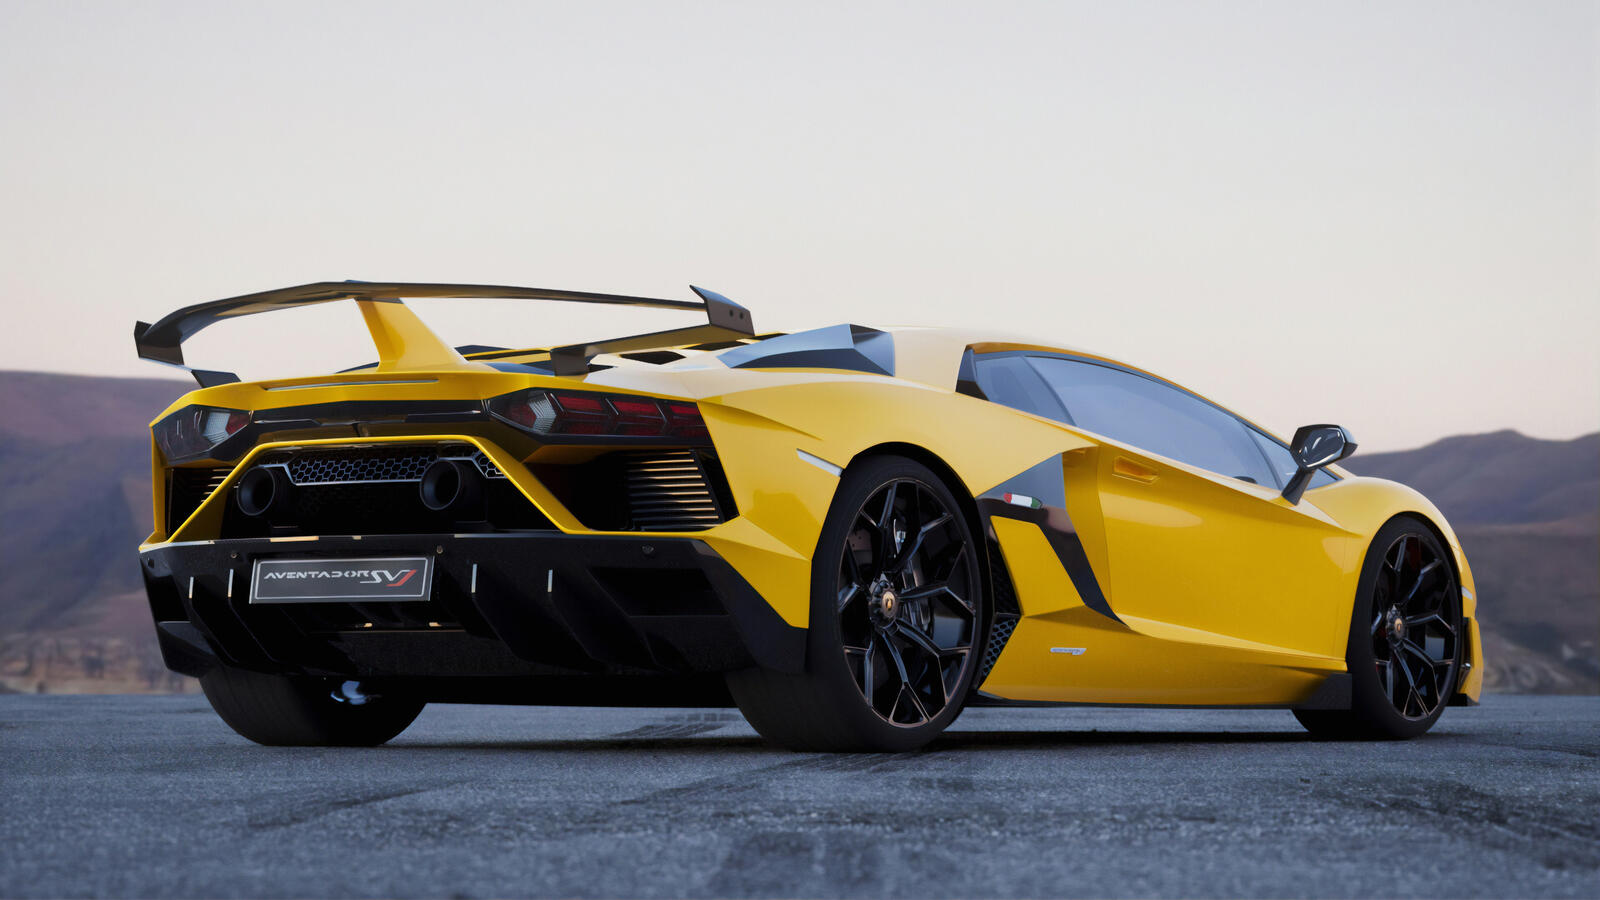 Wallpapers Lamborghini Aventador cars view from behind on the desktop